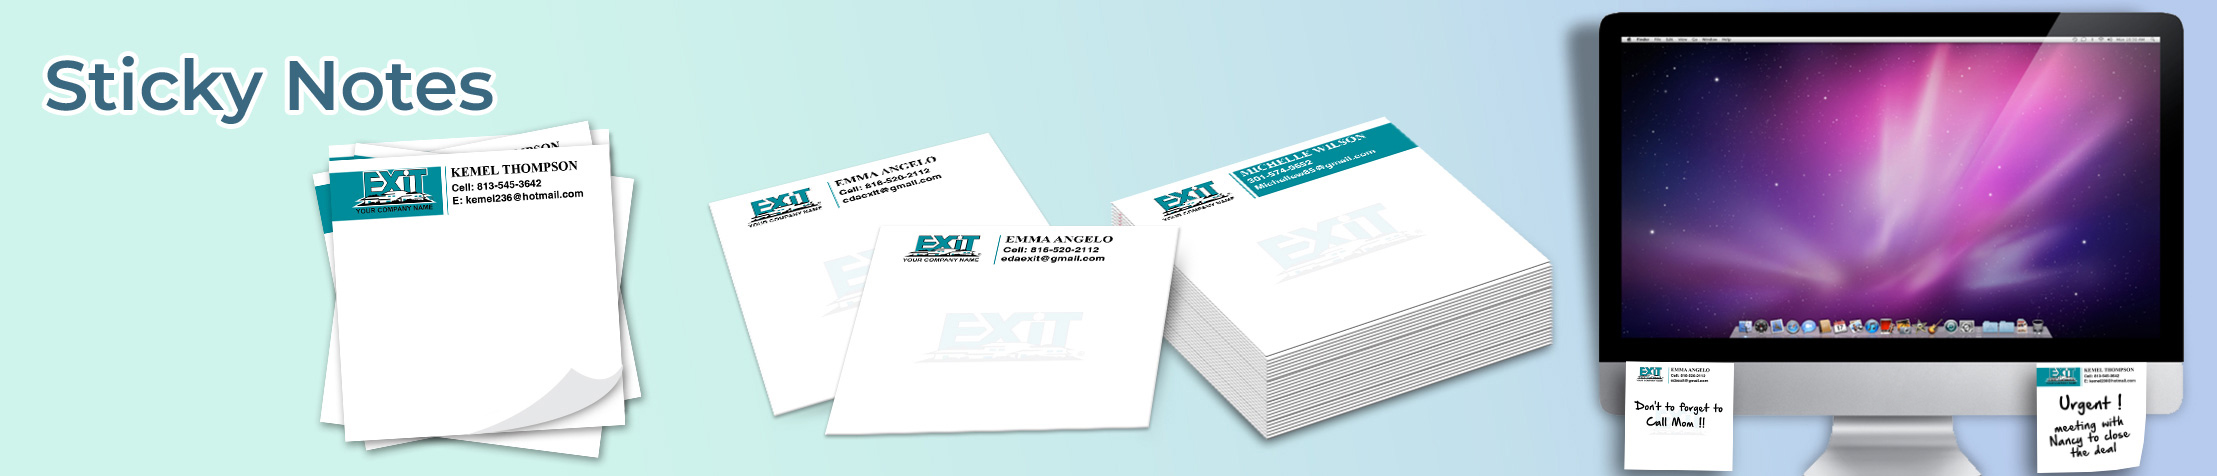 Exit Realty Sticky Notes - Exit Realty approved vendor personalized realtor post it note pads | BestPrintBuy.com